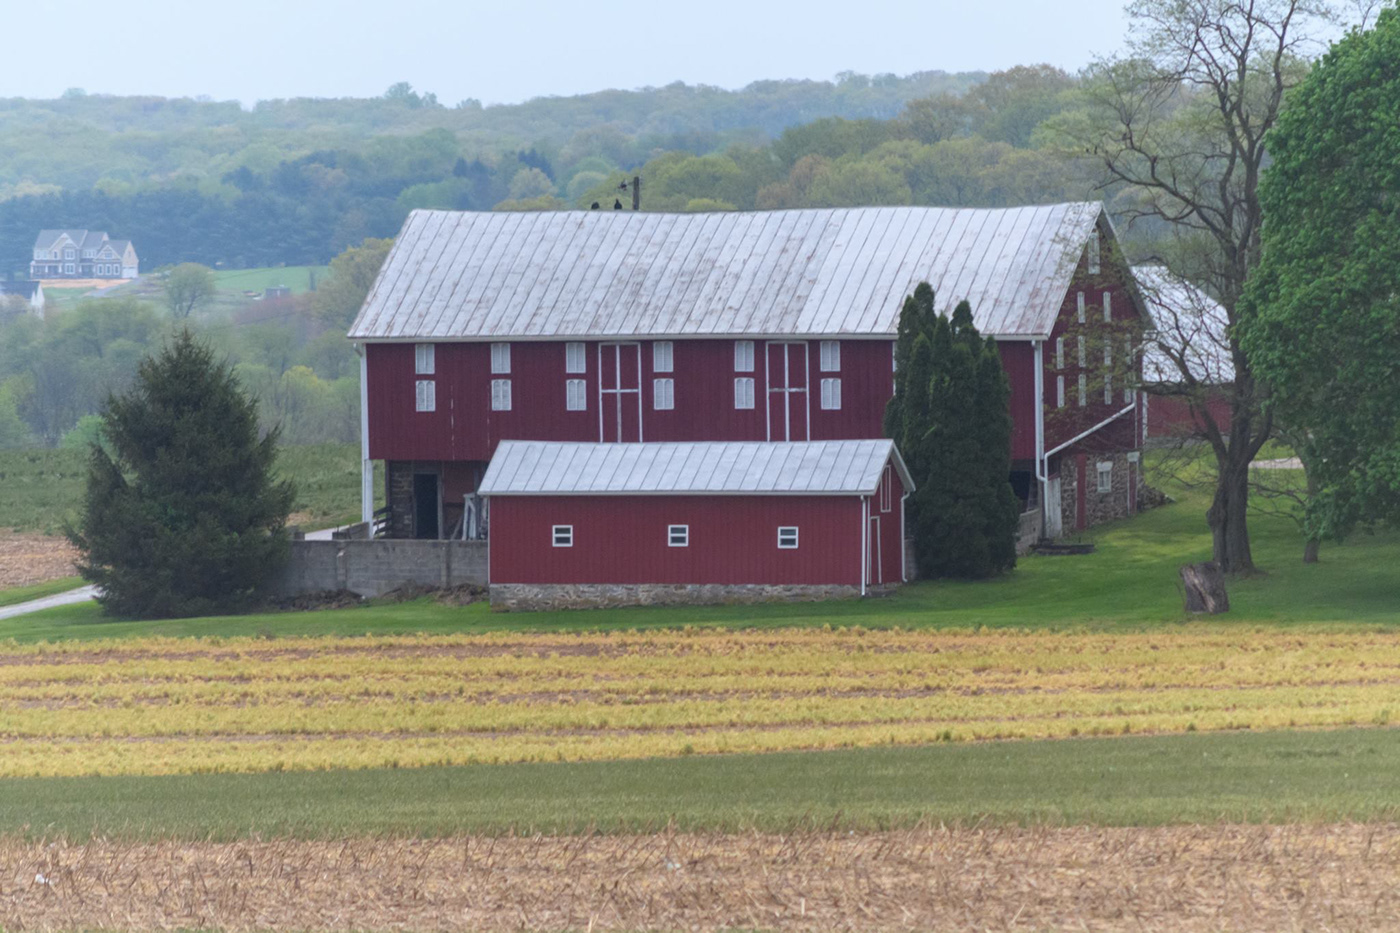 barn country county maryland MD Carroll county westminster Baltimore old new